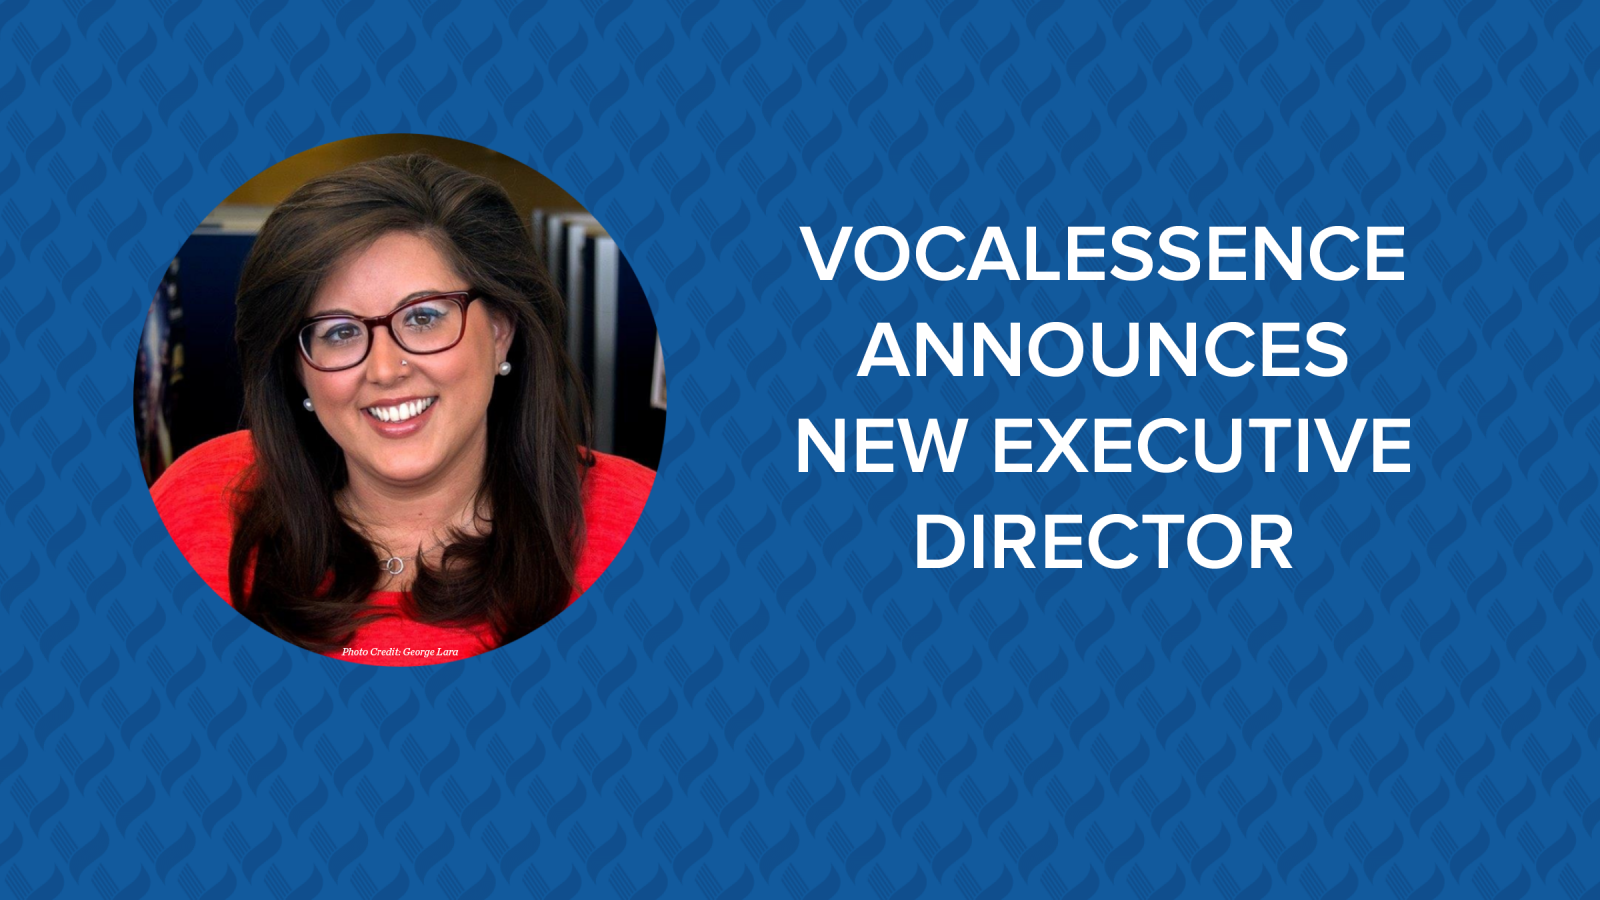 Image of Amy Wielunski, photo credit George Lara, on blue background with VocalEssence "V" logo with VocalEssence Announces New Executive Director in white letters.